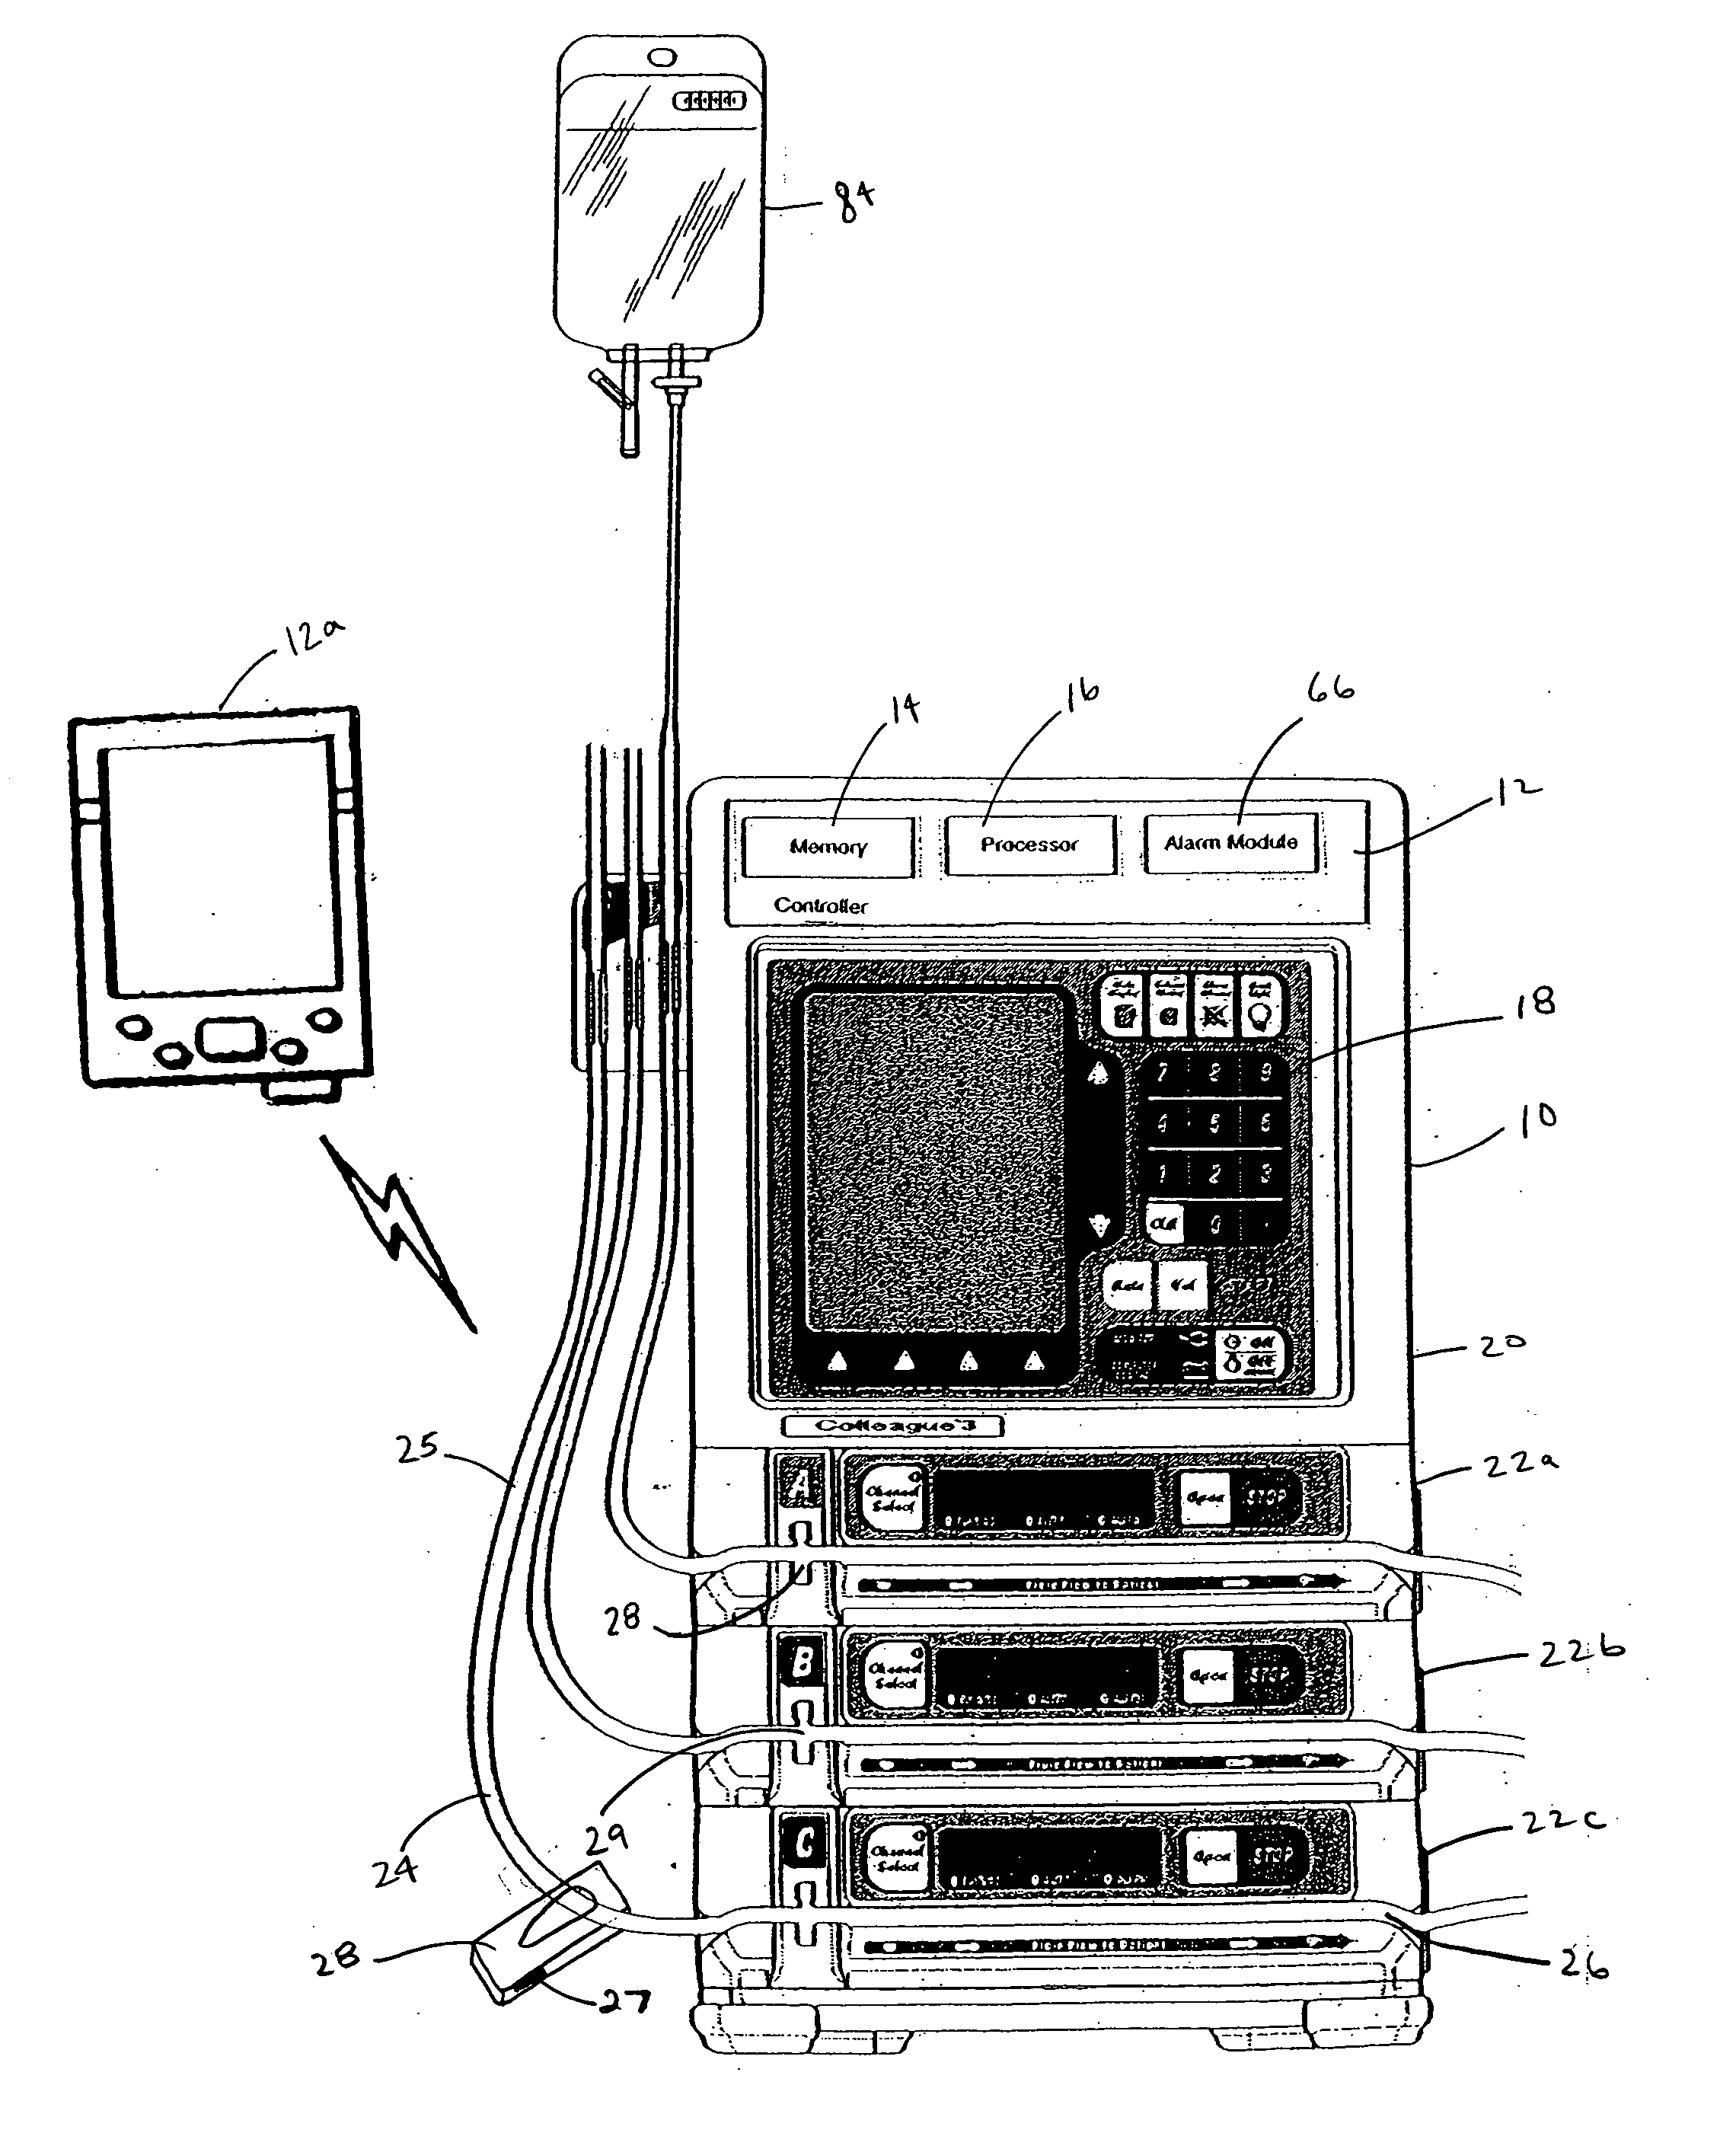 Apparatus and method for therapeutic delivery of medication